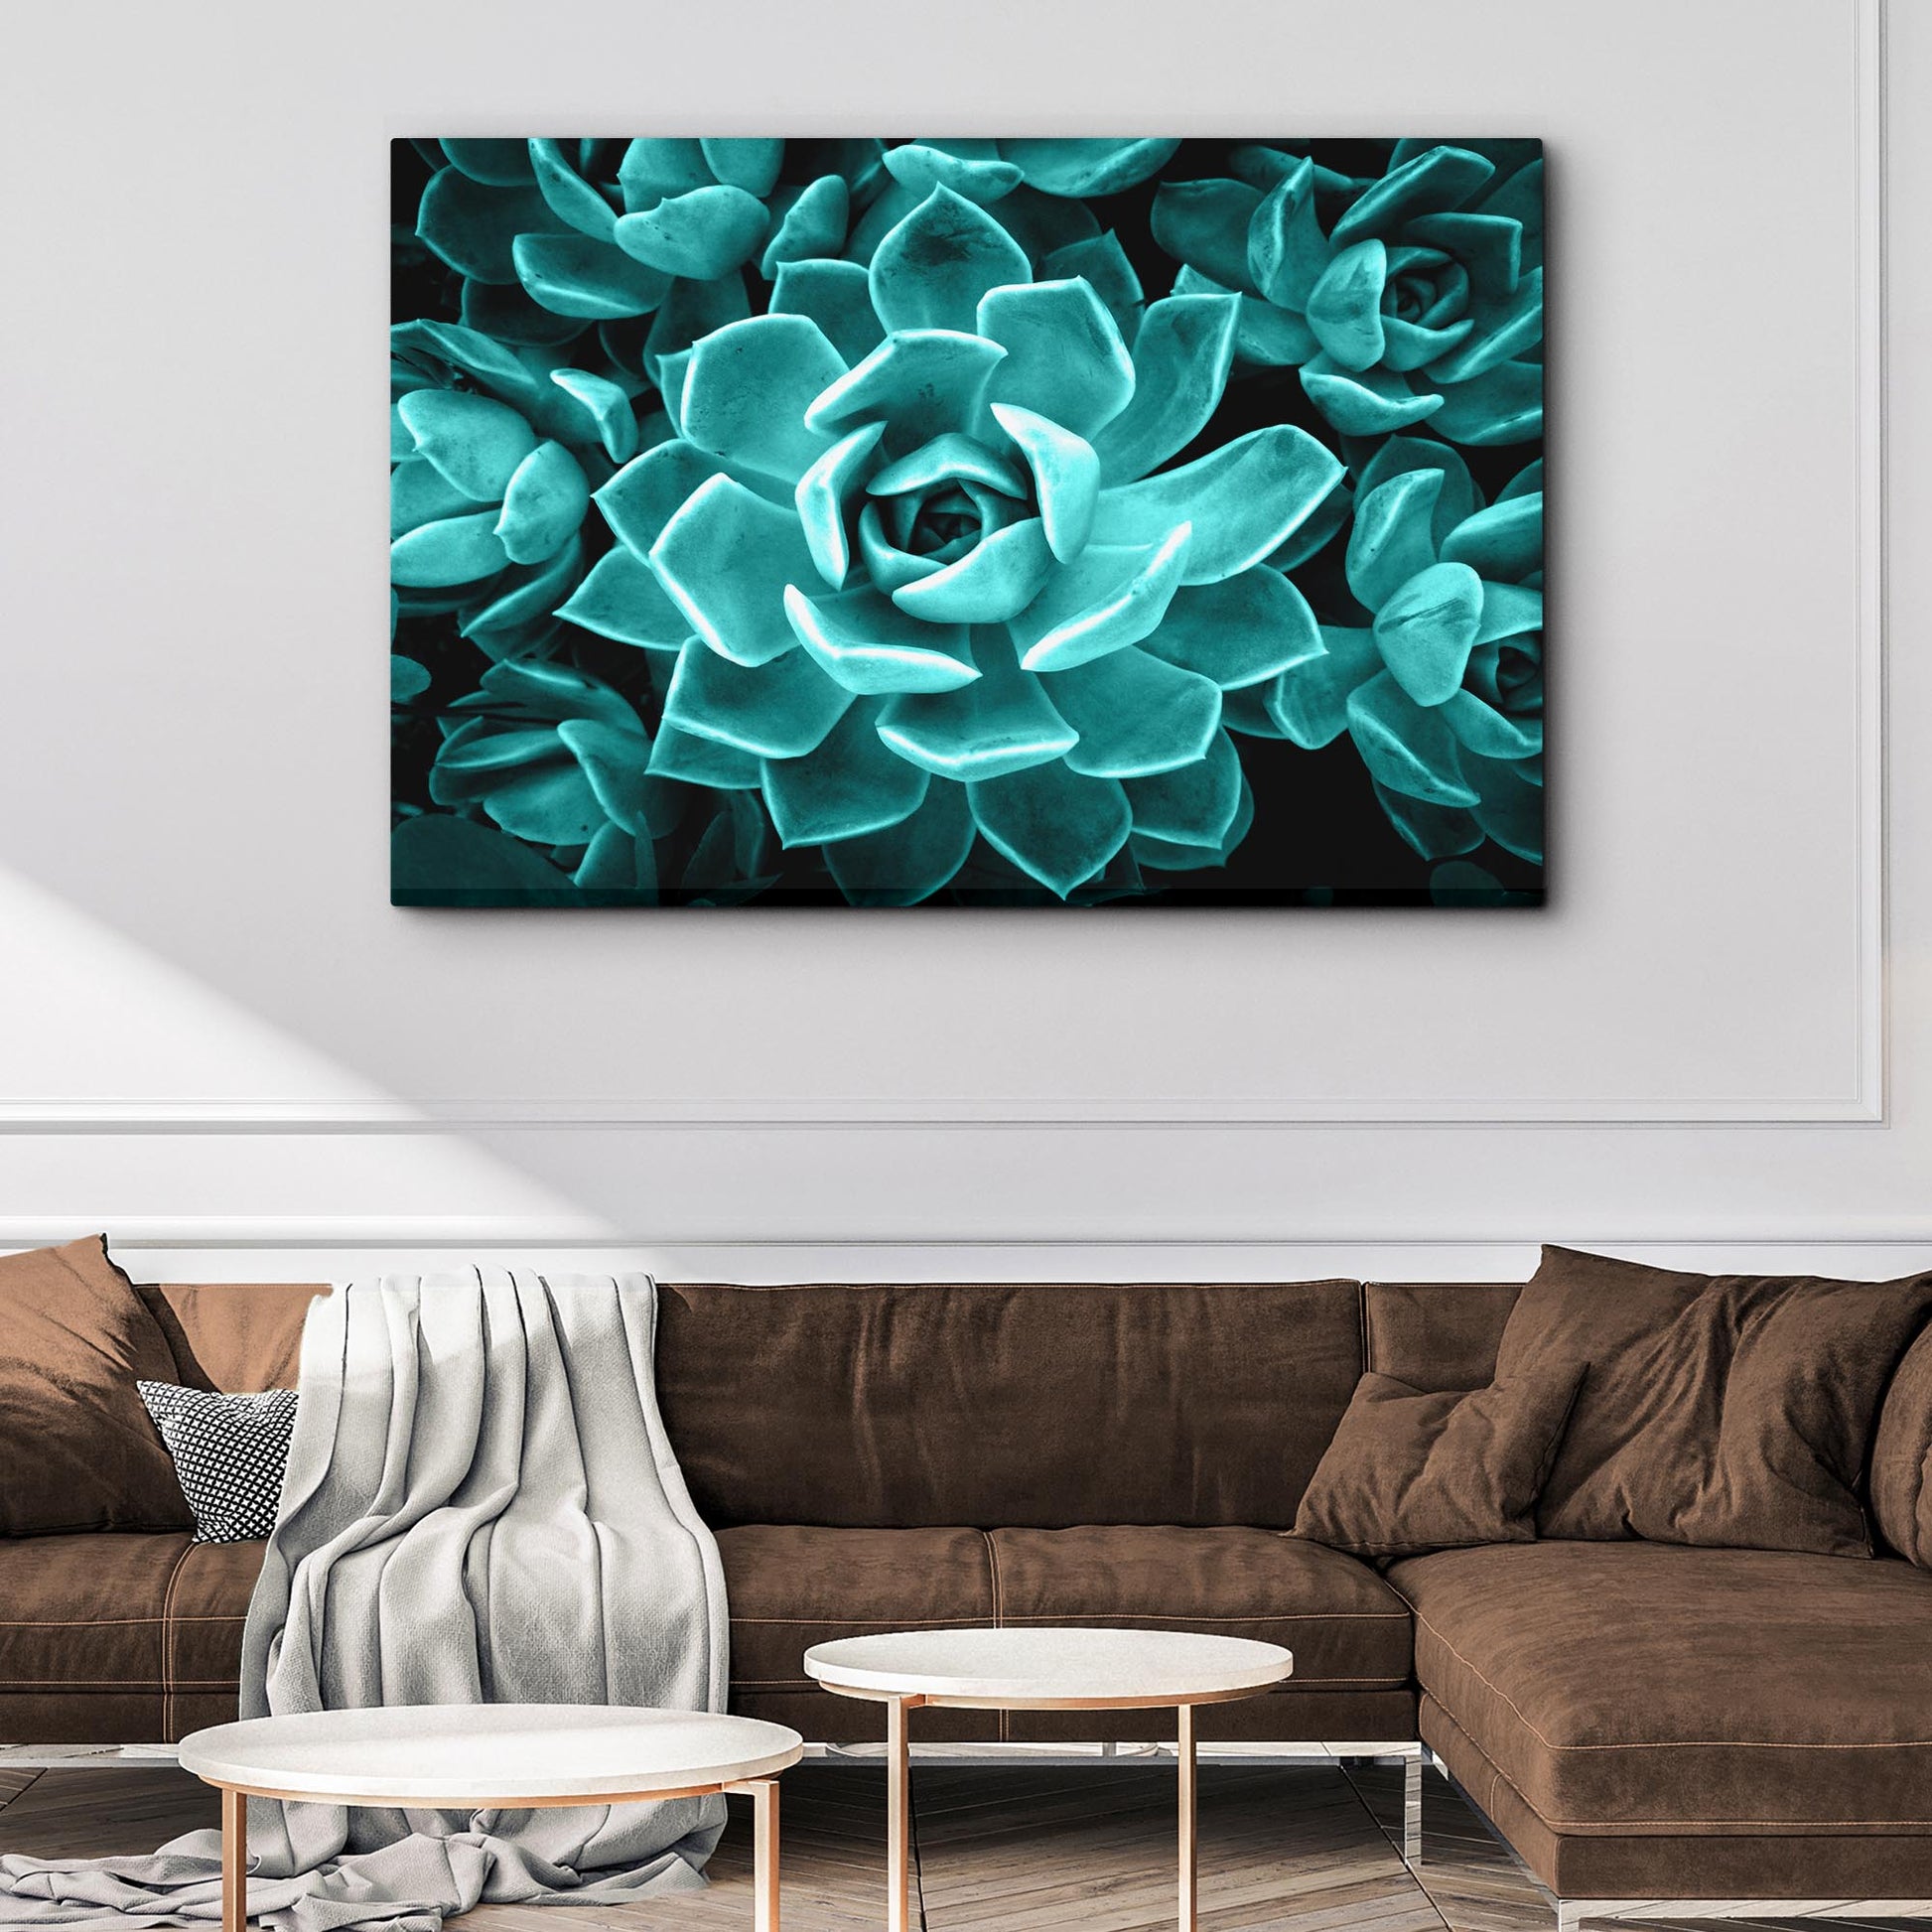 Teal Rose Succulent Canvas Wall Art II Style 2 - Image by Tailored Canvases